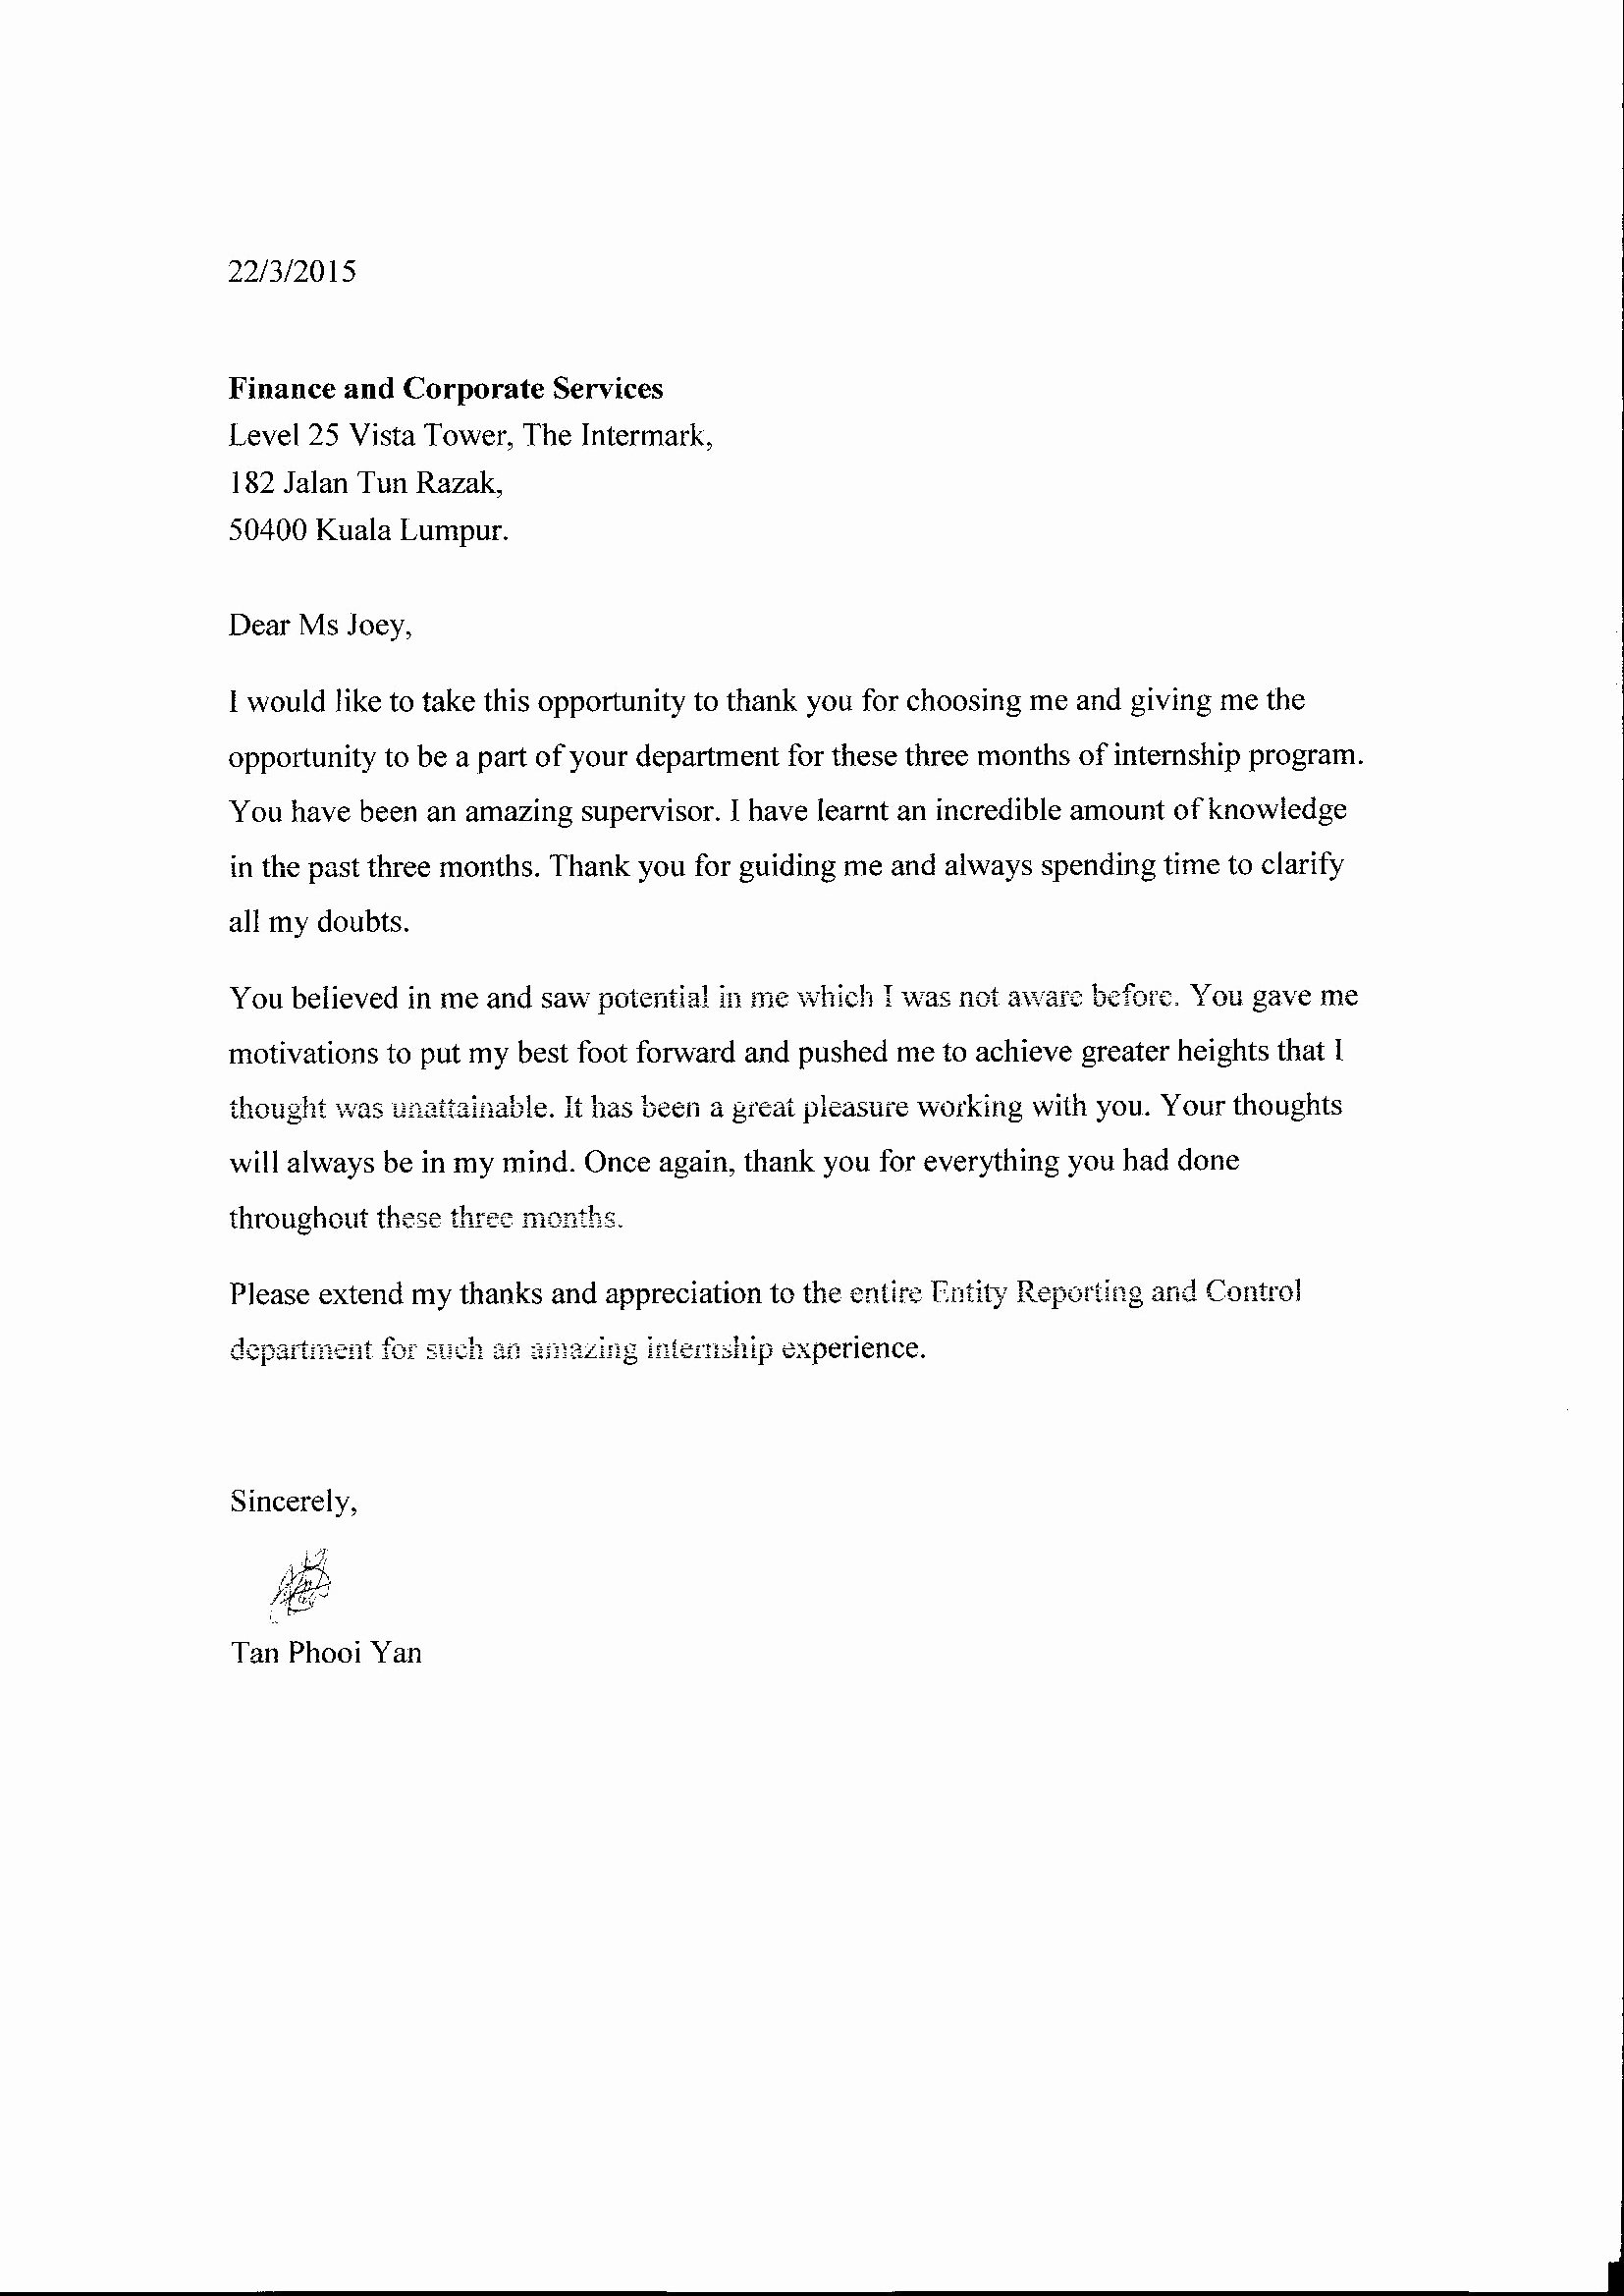 Recommendation Thank You Letter Unique Thank You Letter Reference Letter Tan Phooi Yan